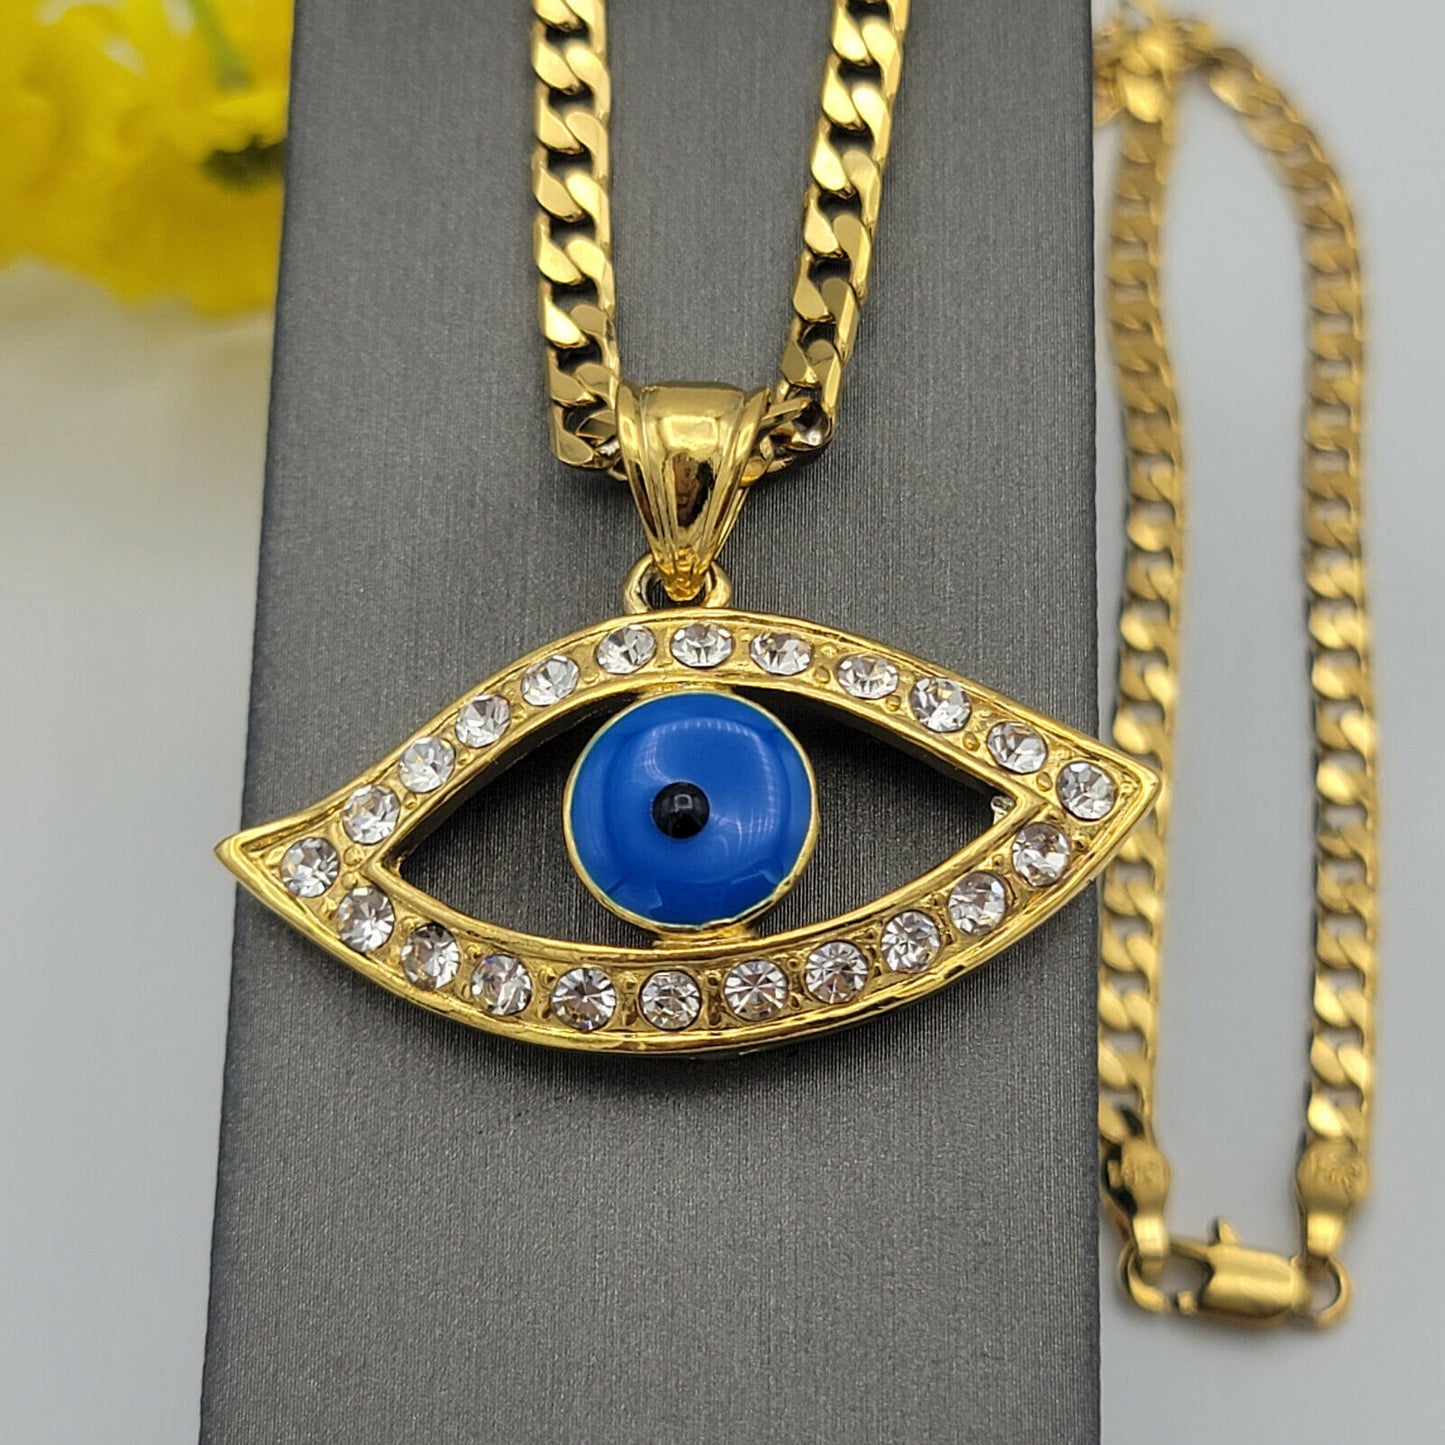 Necklaces - 24K Gold Plated. Blue Eye Crystal Pendant & Chain. Clear Crystals.